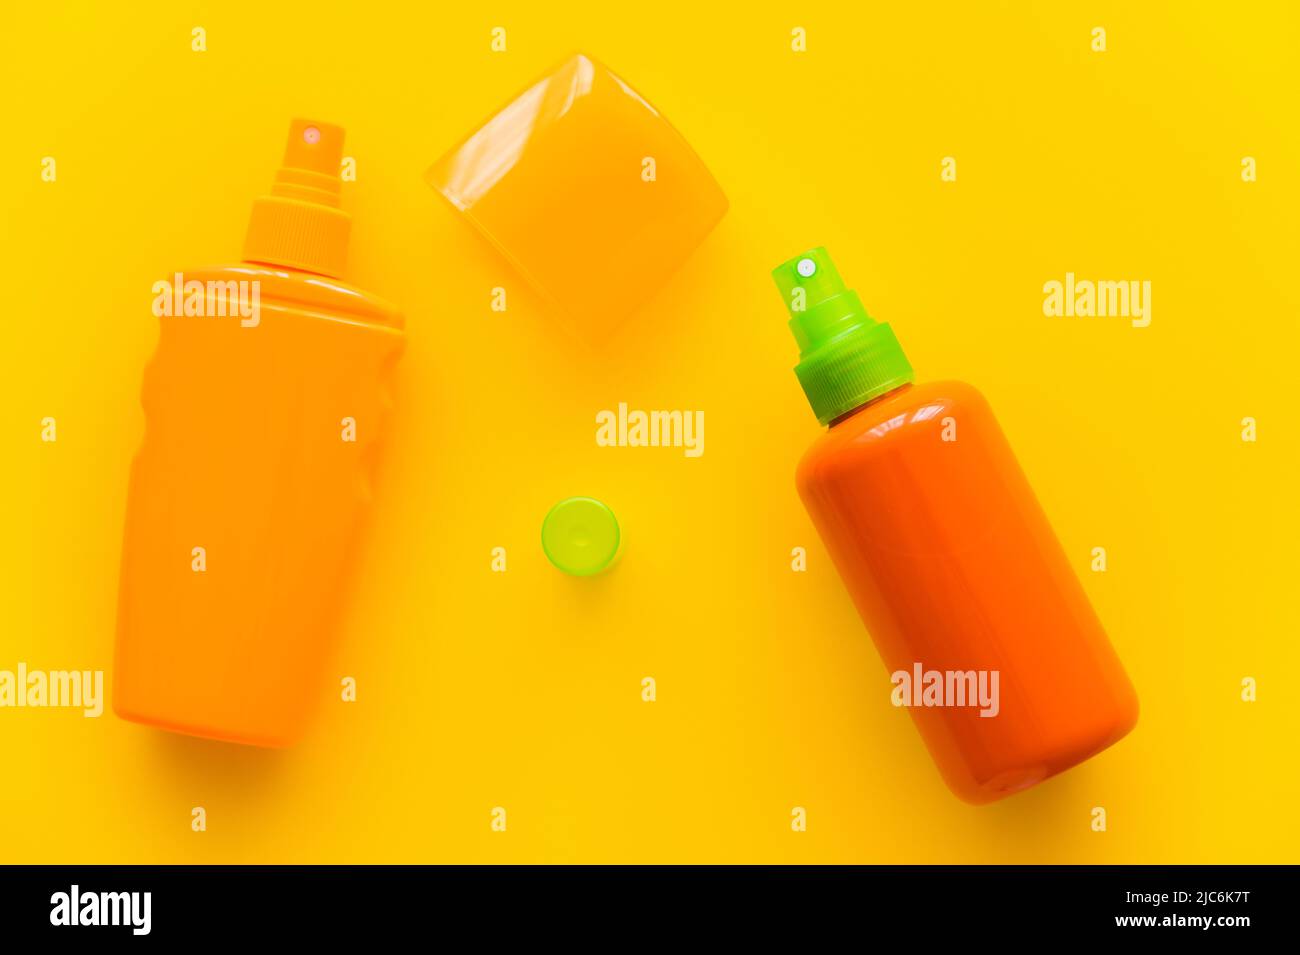 Top view of sunscreens bottles and caps on yellow background Stock Photo